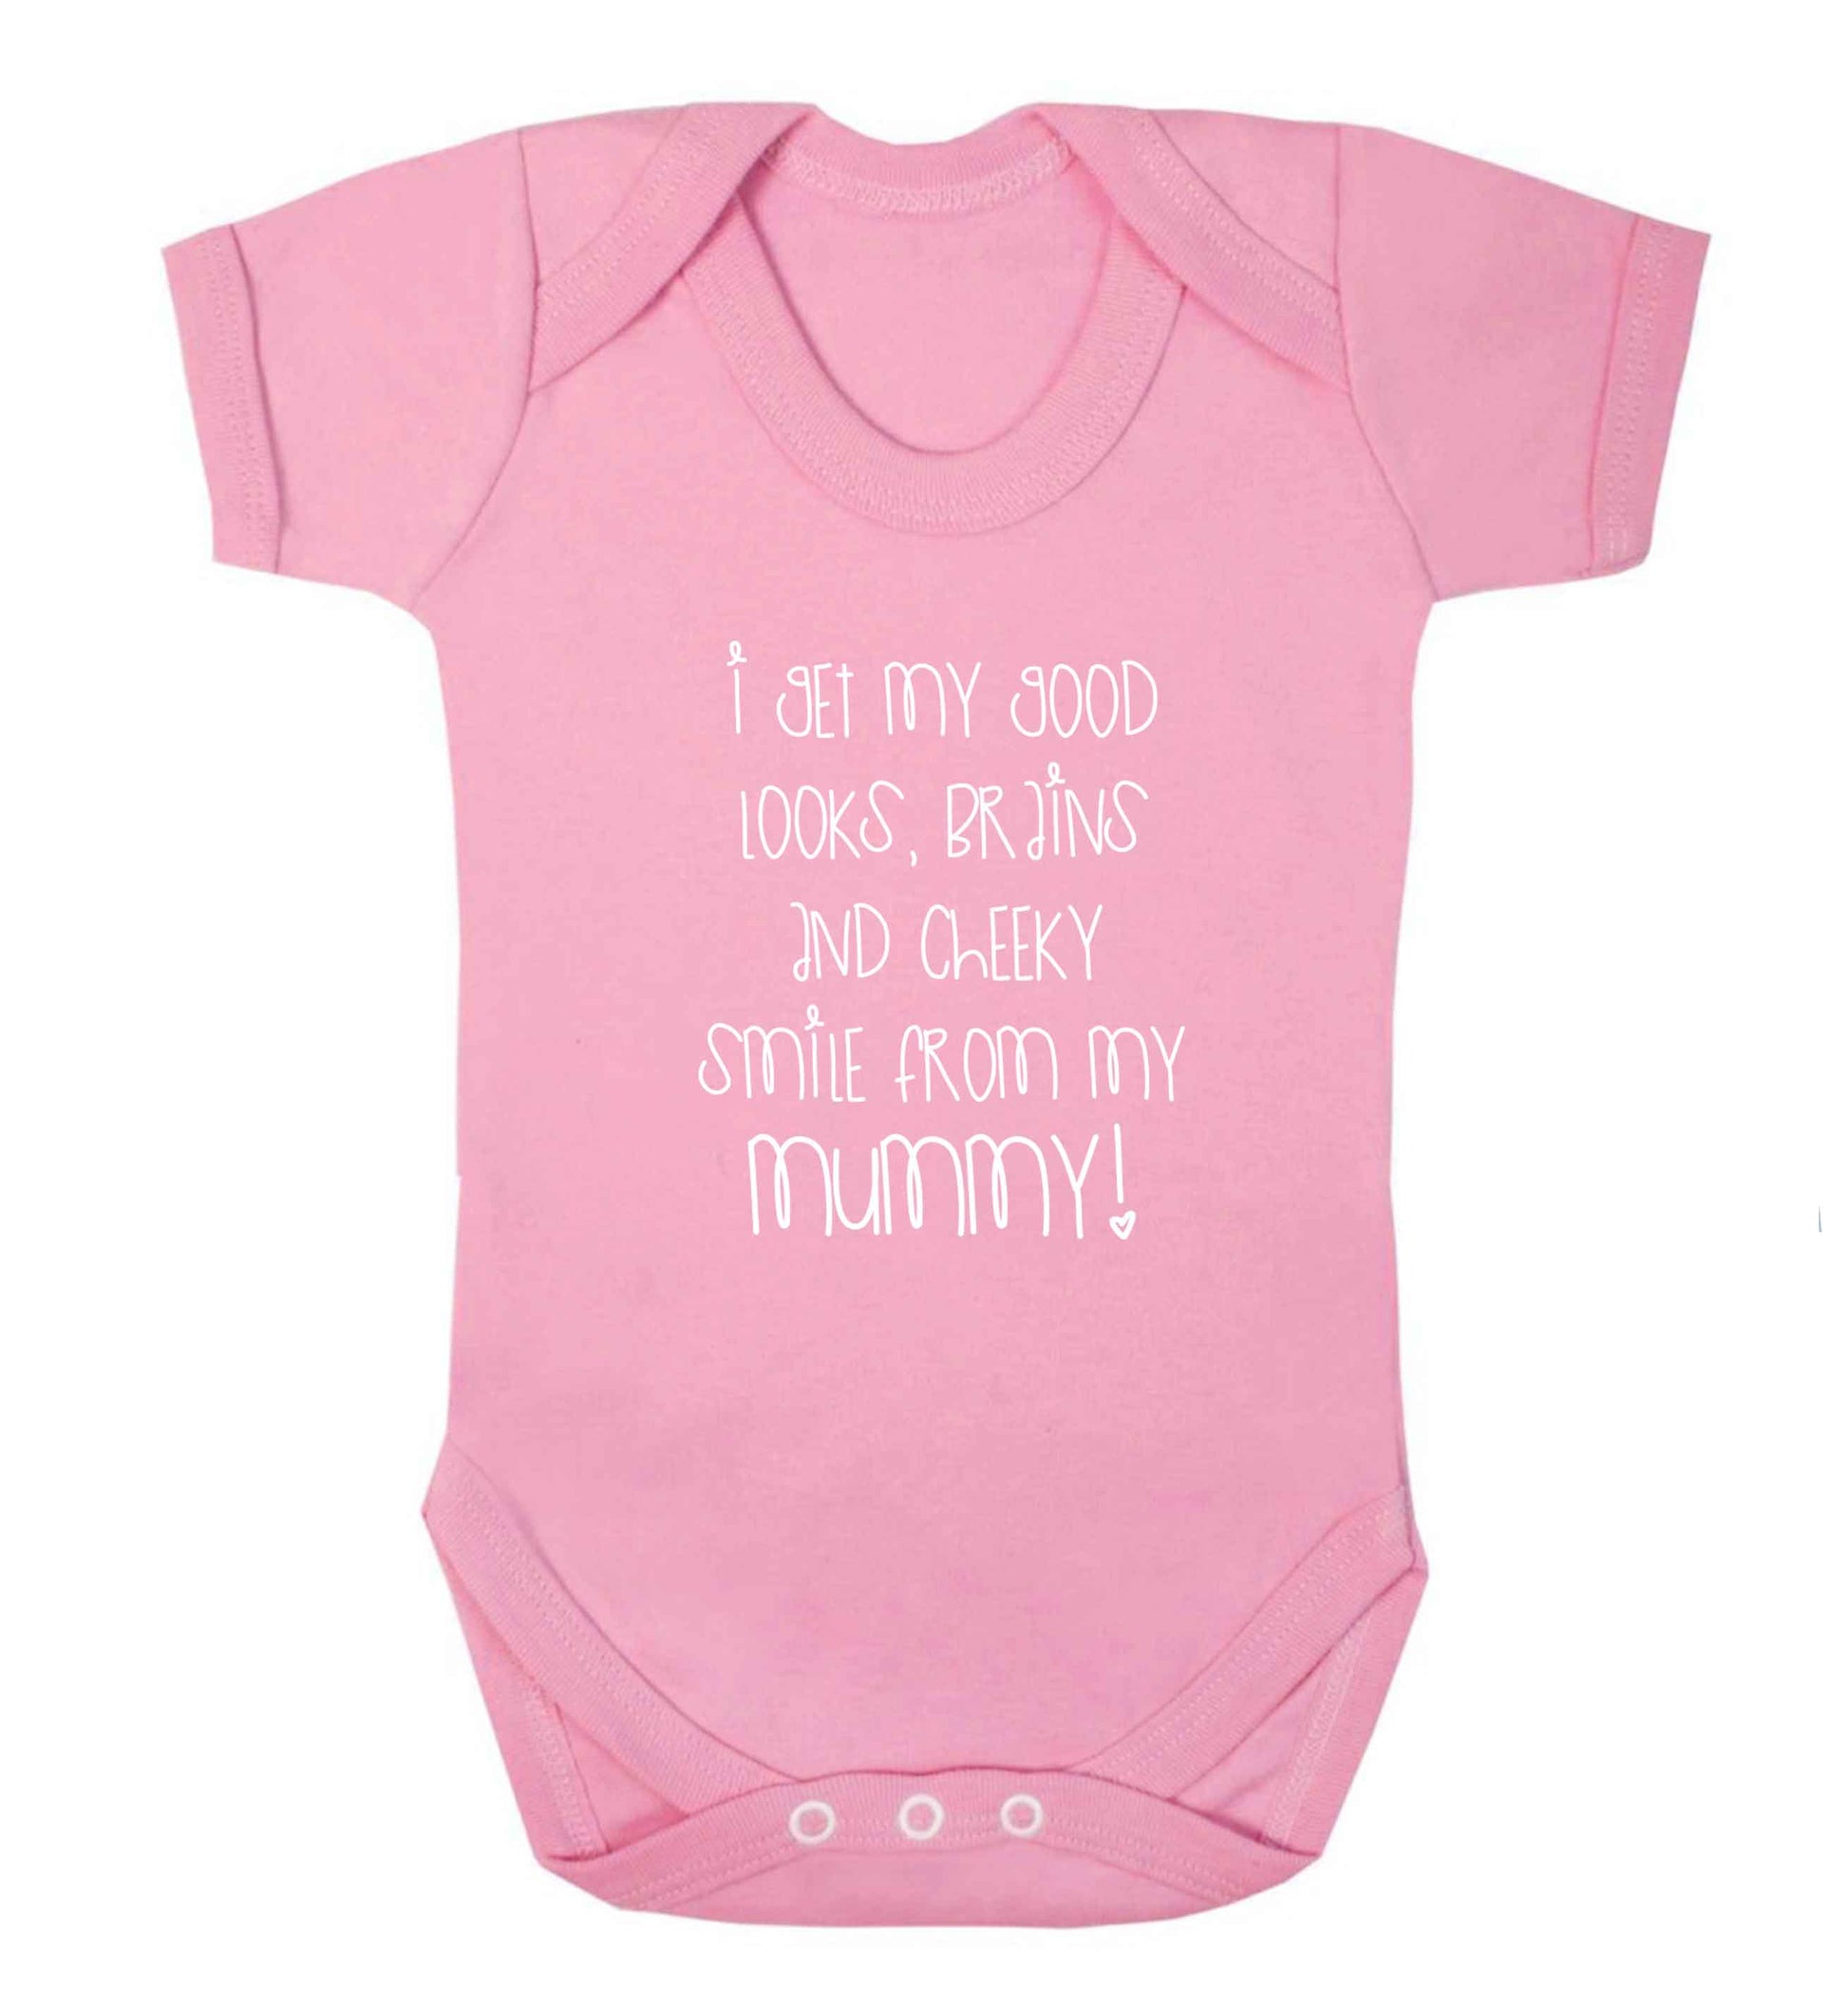 I get my good looks, brains and cheeky smile from my mummy baby vest pale pink 18-24 months